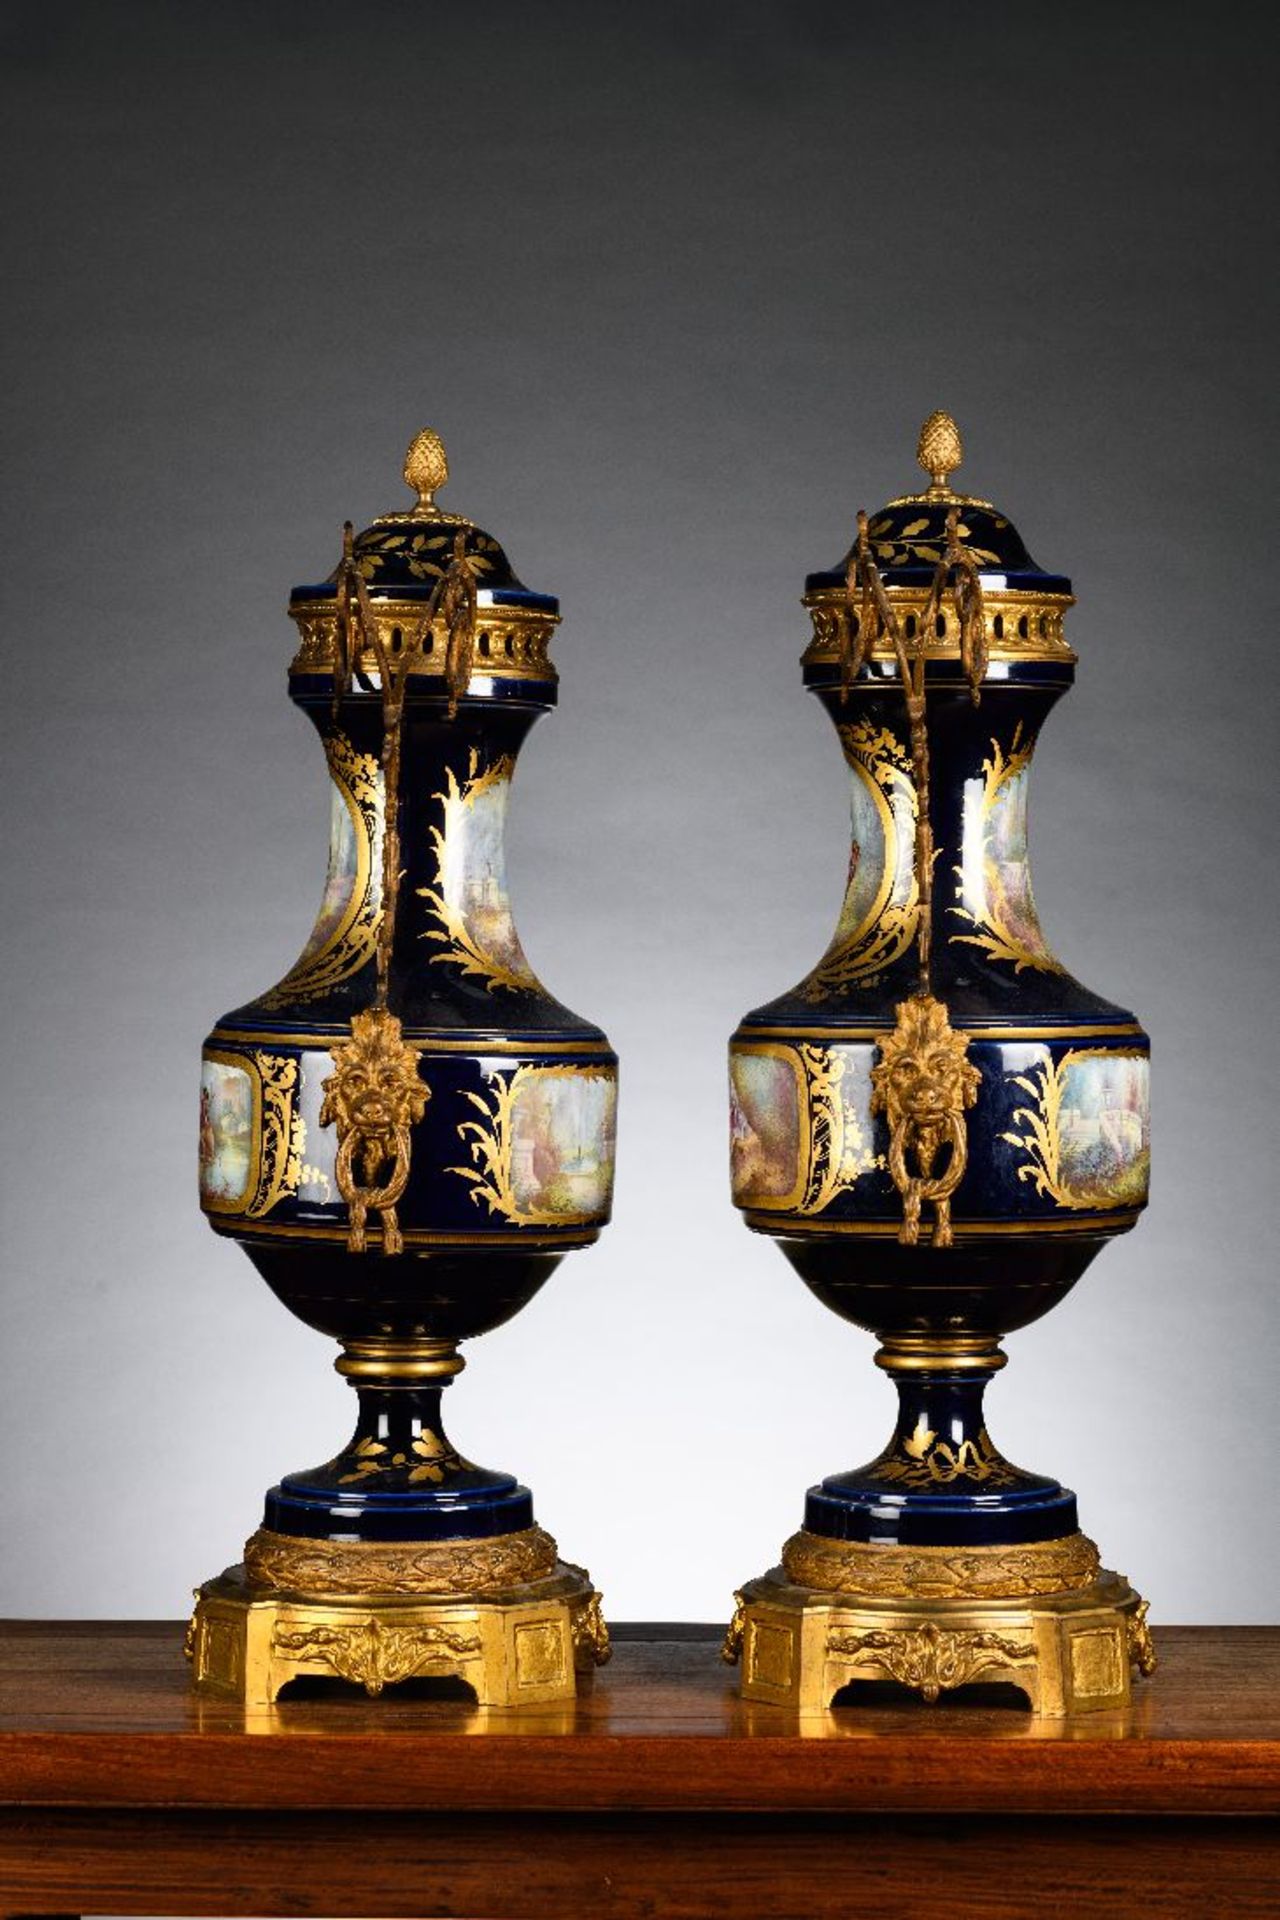 A pair of Sèvres porcelain vases with gilt bronze mounts, 19th century (*) - Image 2 of 9